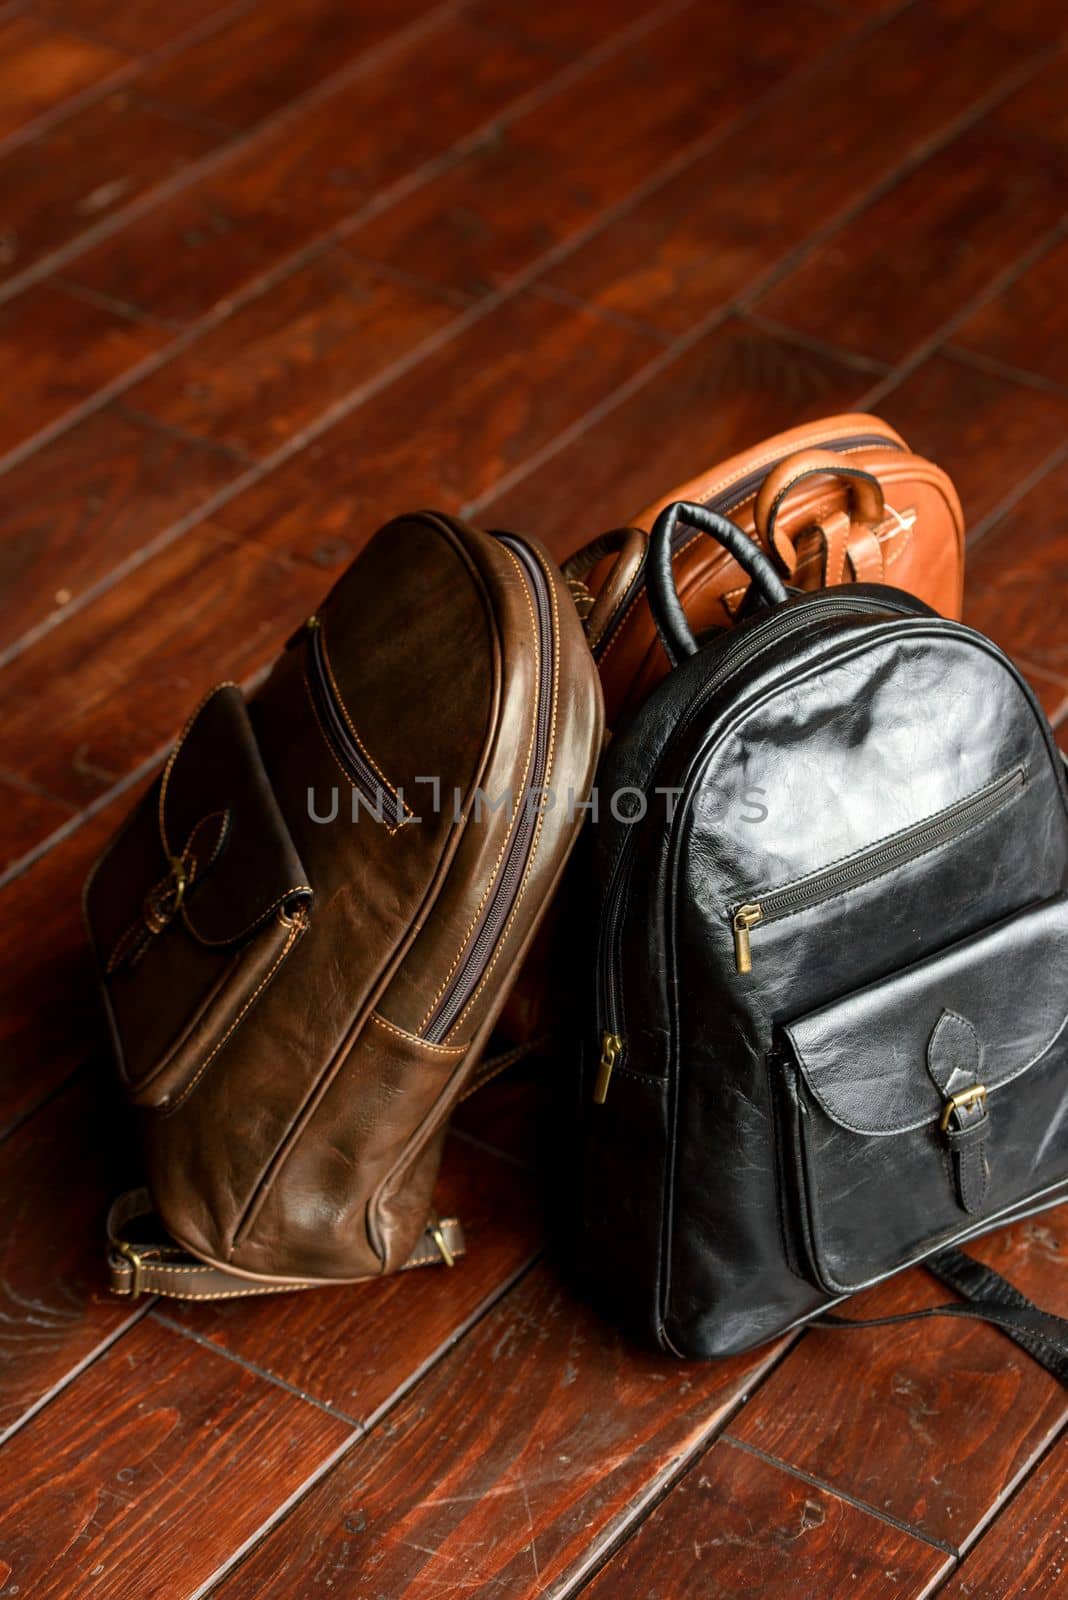 three different colored leather backpacks on a wooden floor by Ashtray25